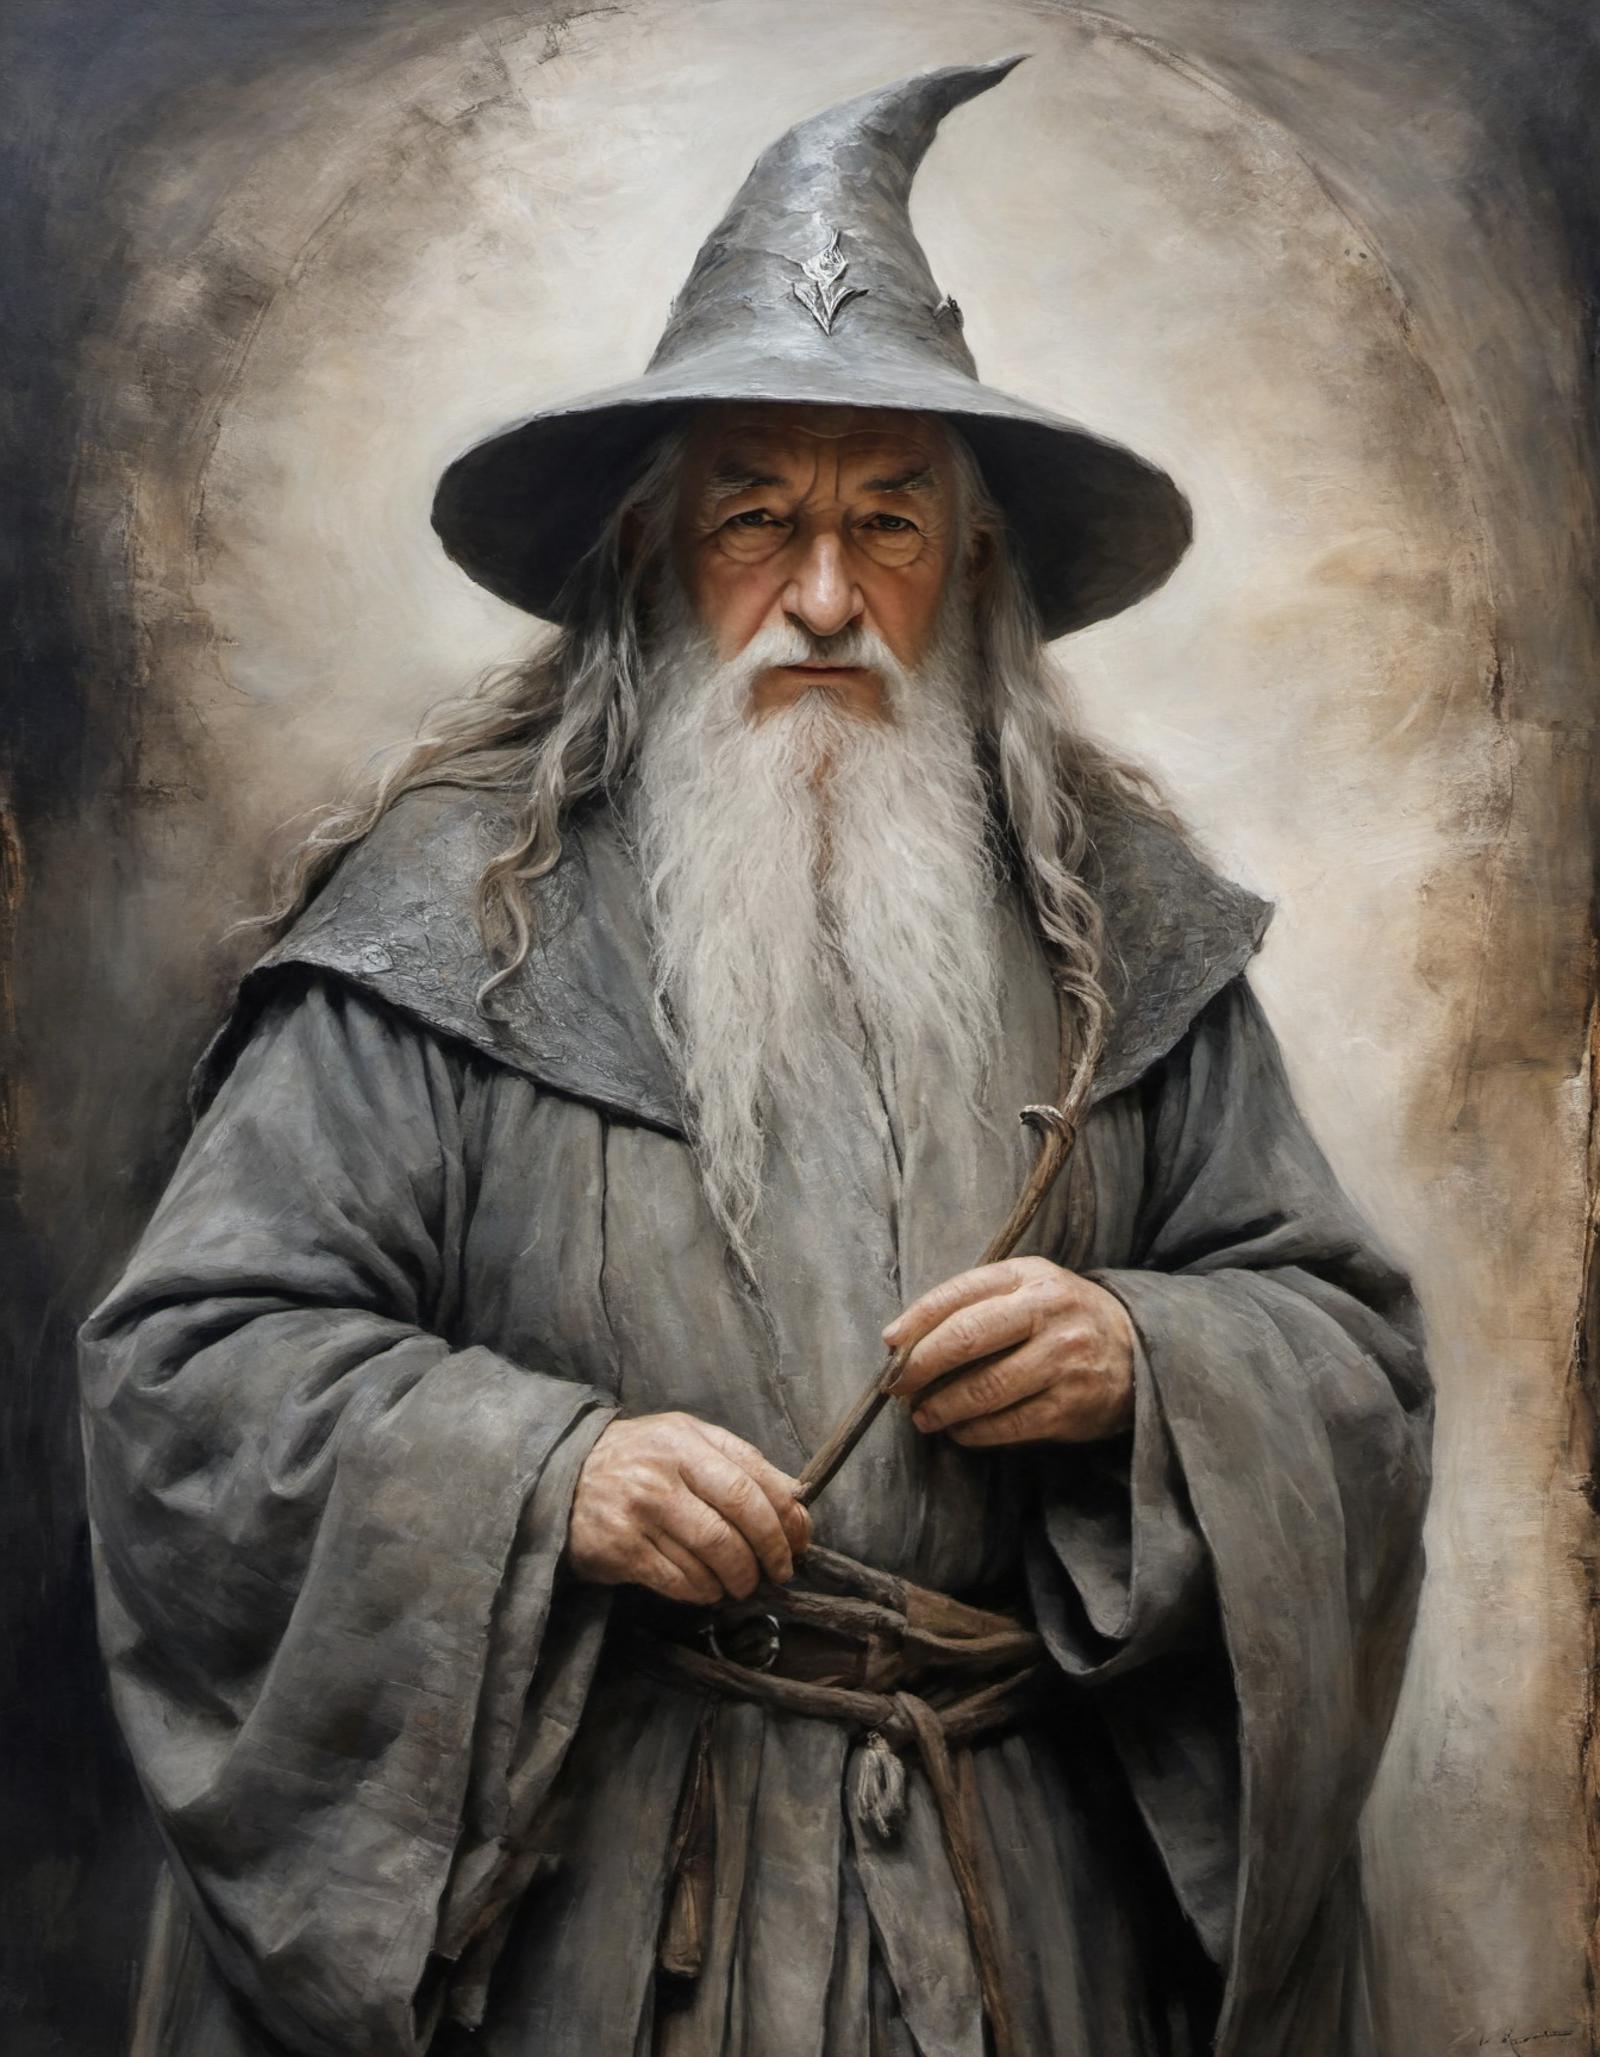 "Wizard with Long Beard and Wand"